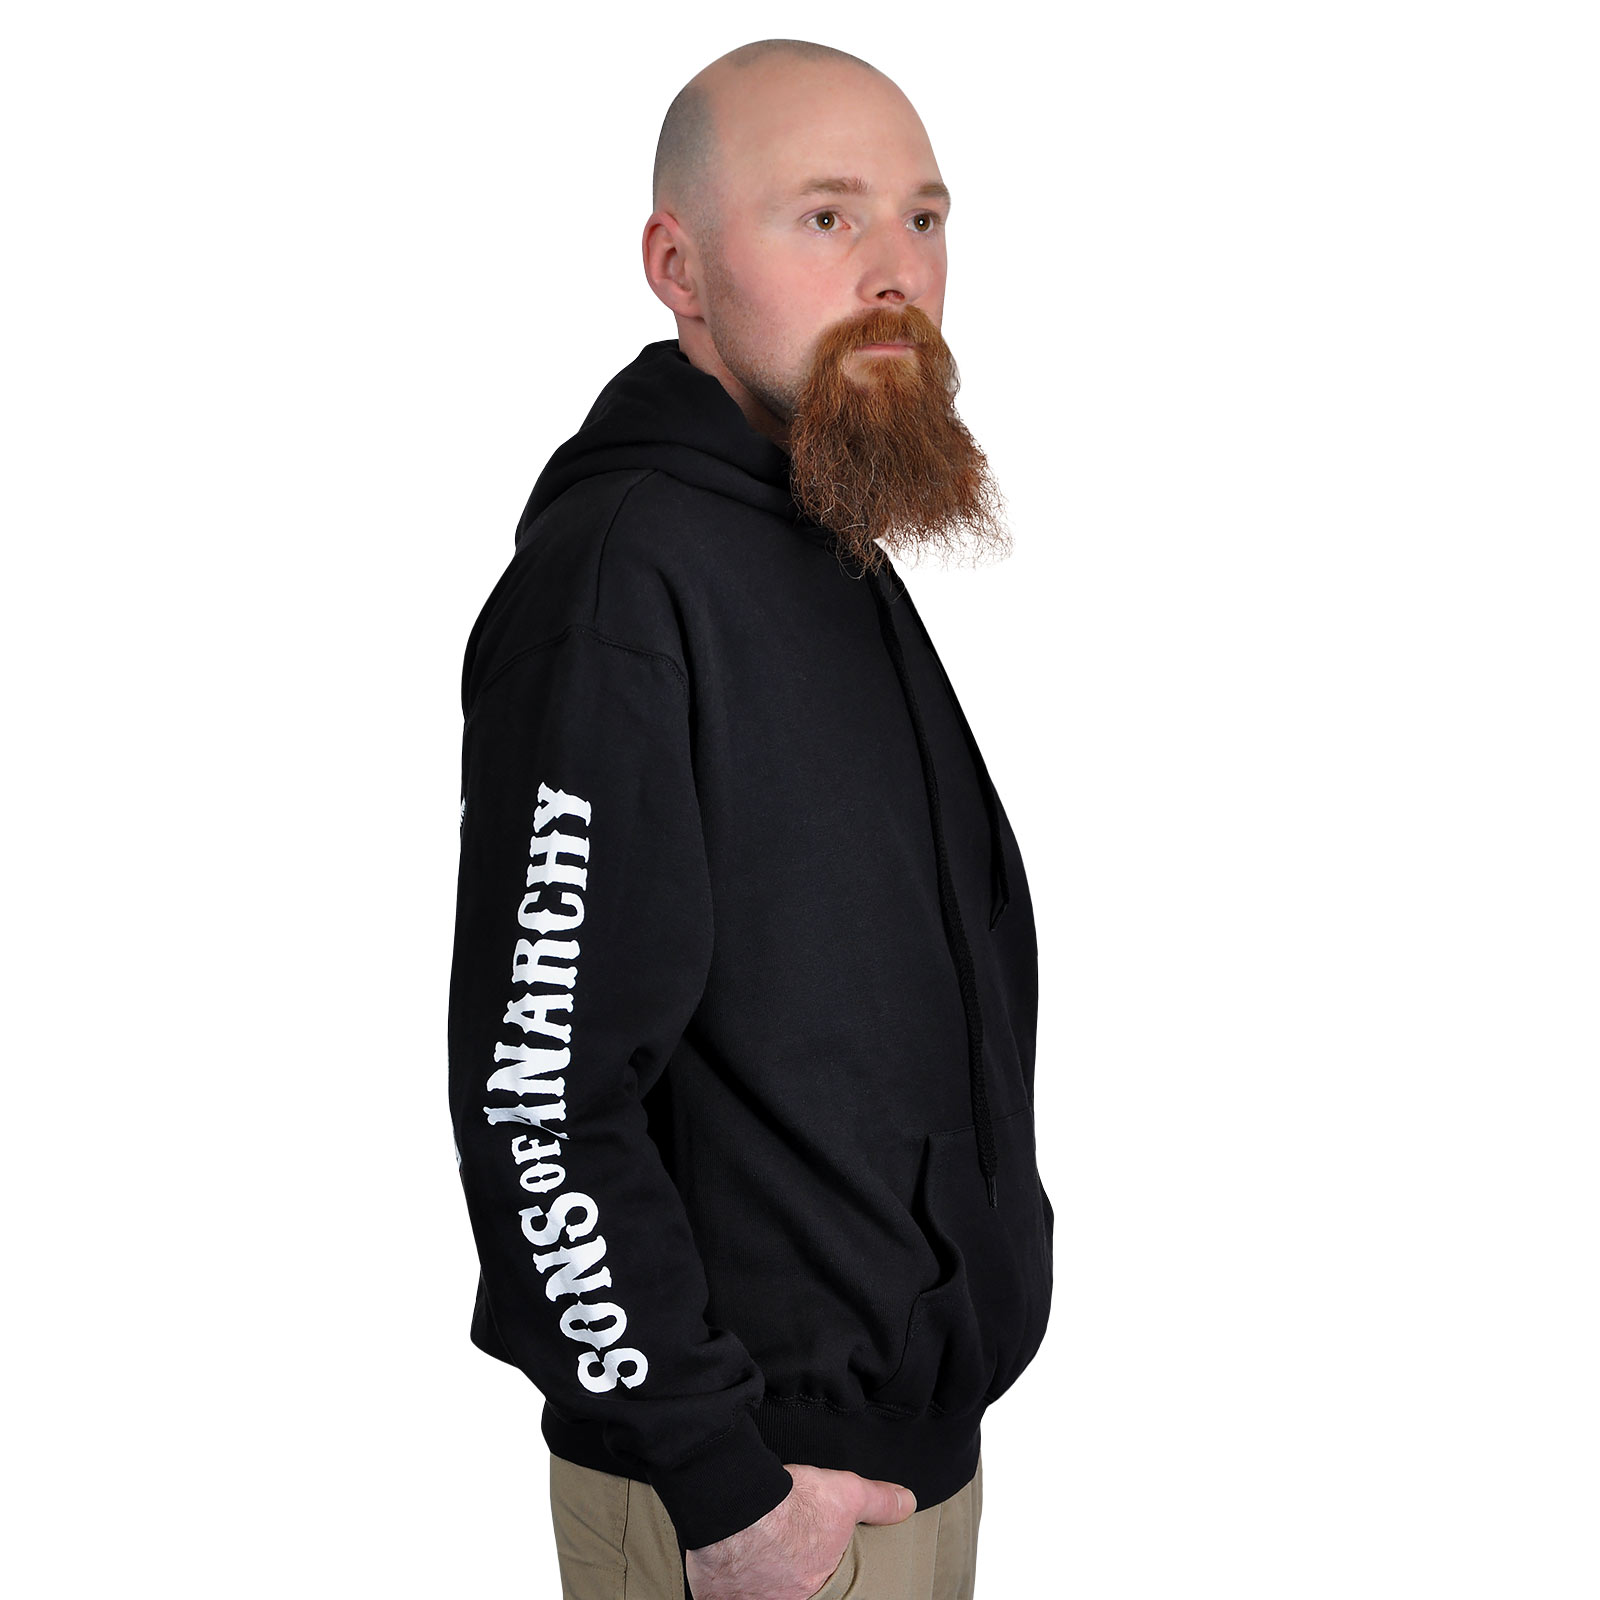 Sons of Anarchy - American Outlaw Hoodie